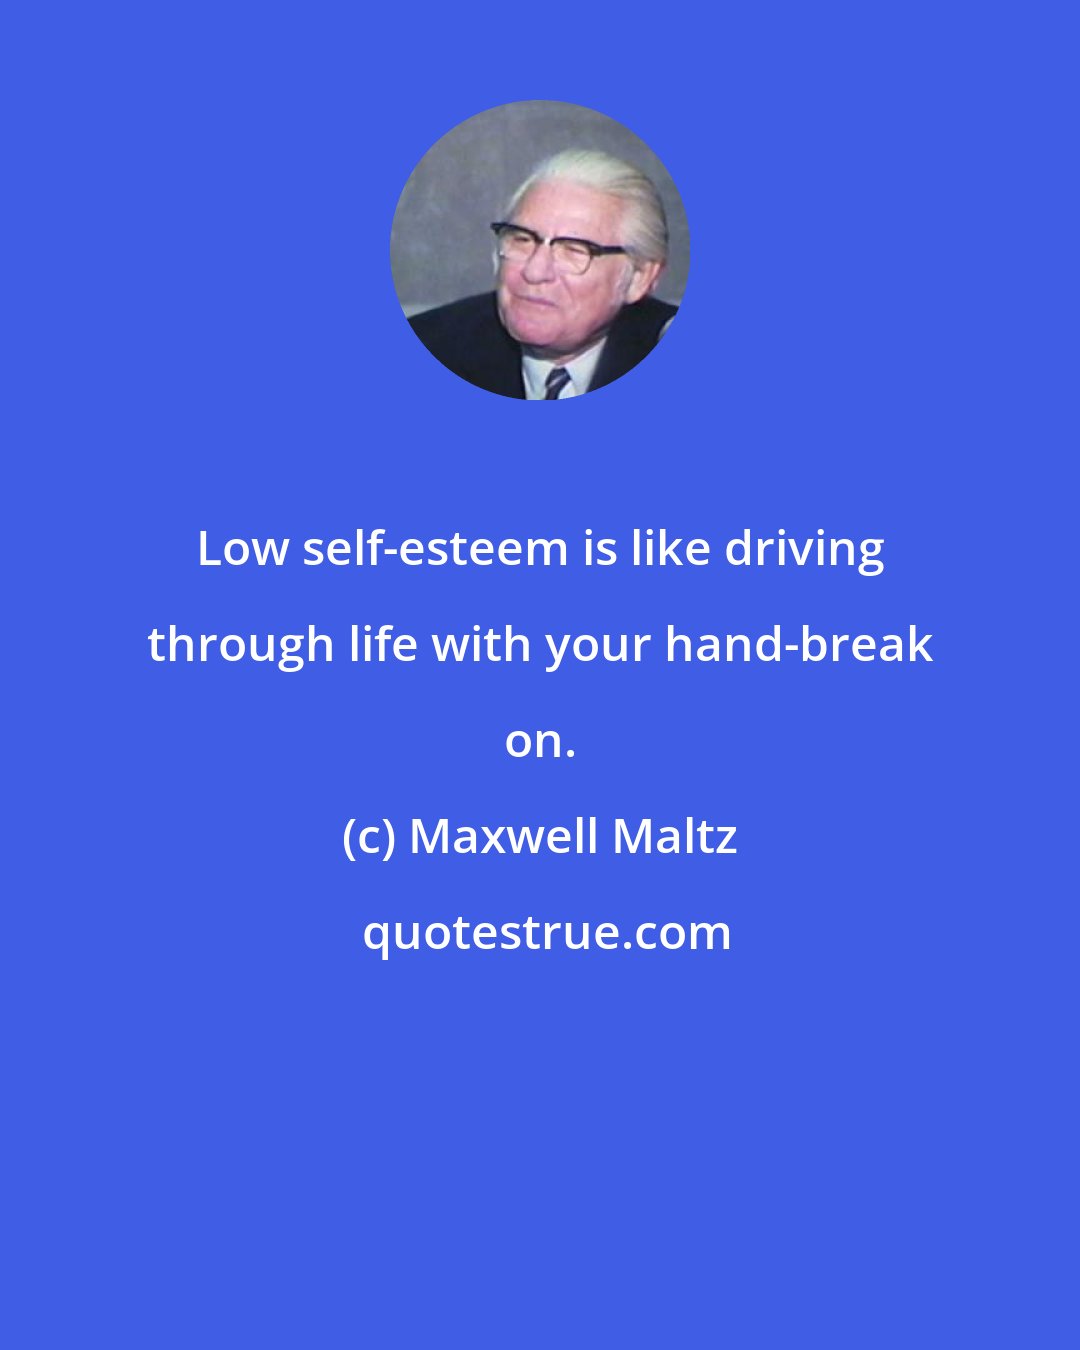 Maxwell Maltz: Low self-esteem is like driving through life with your hand-break on.